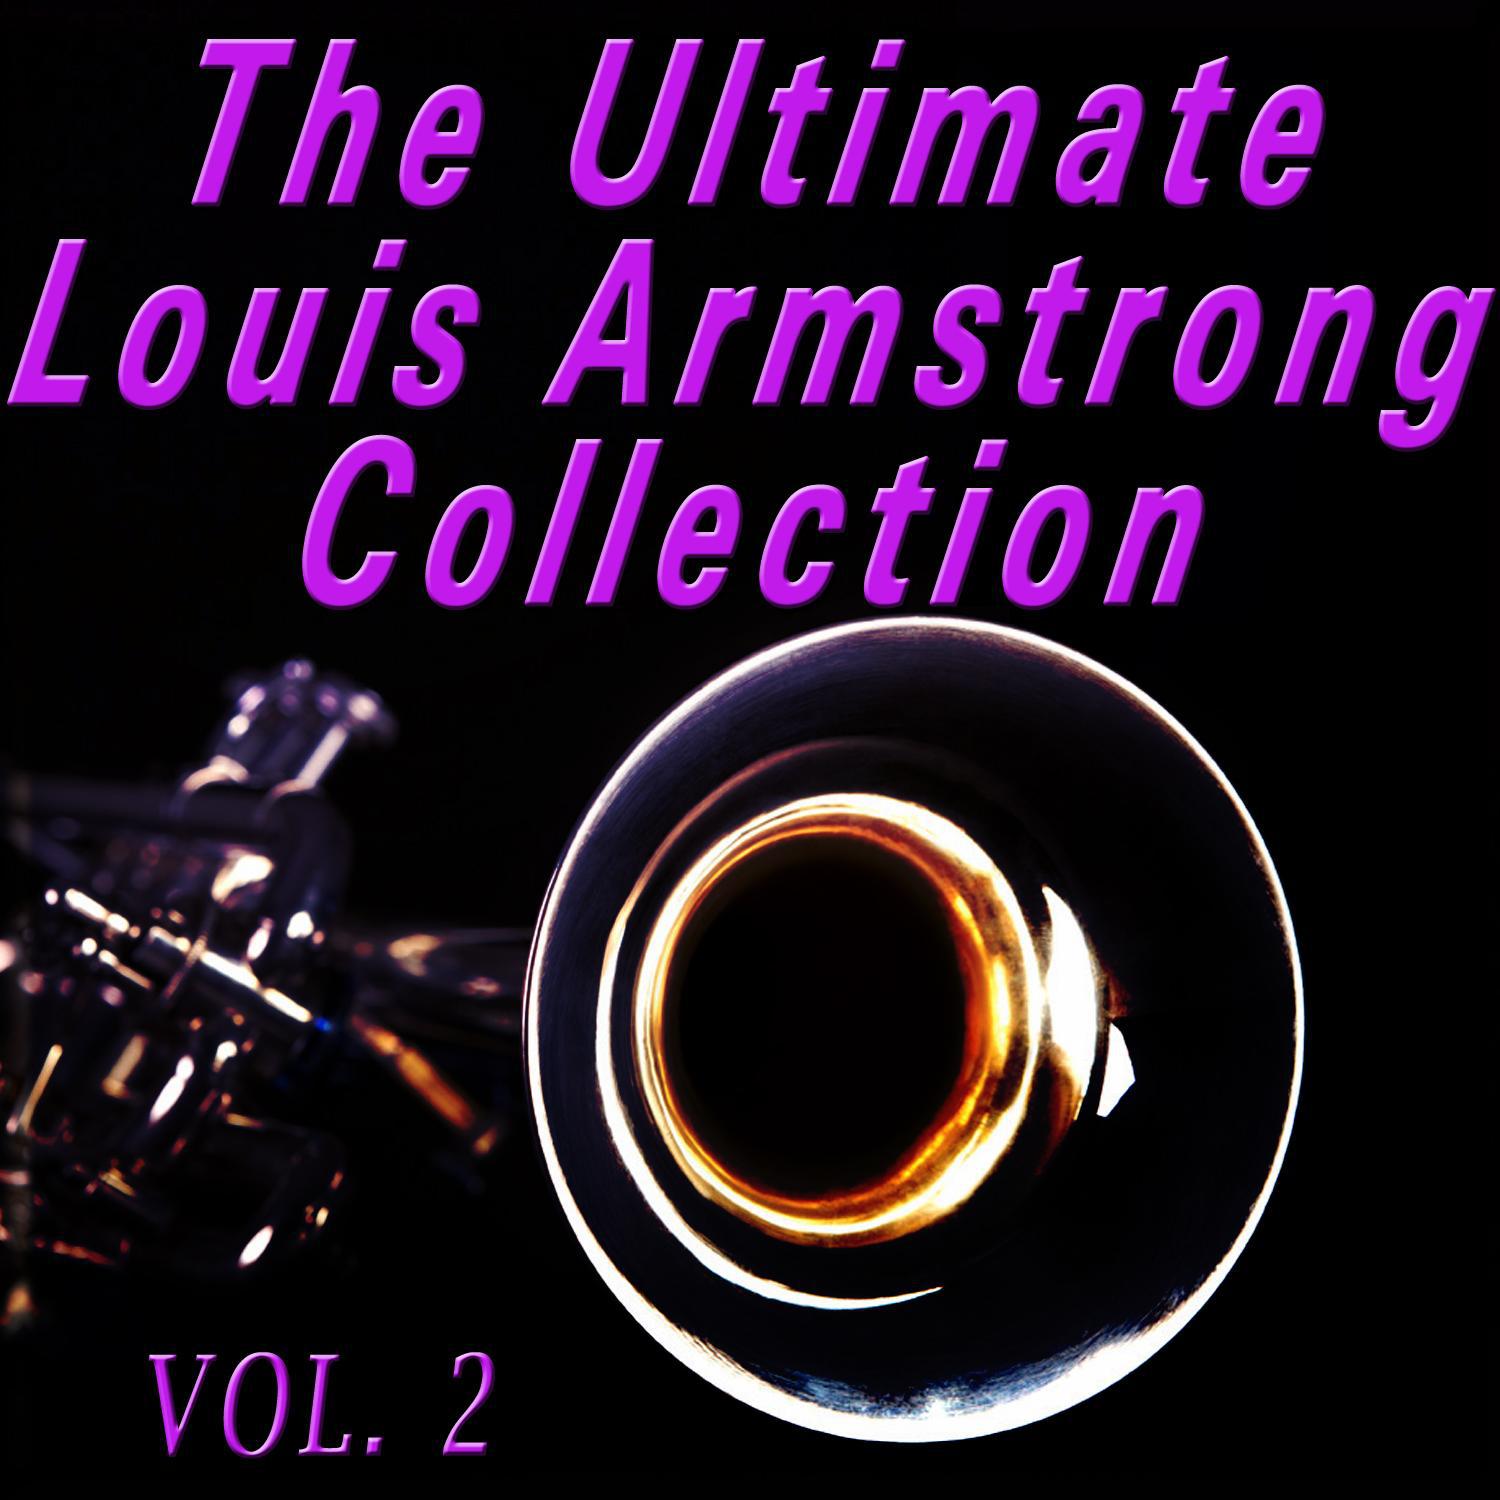 The Ultimate Louis Armstrong Collection, Vol. 2专辑